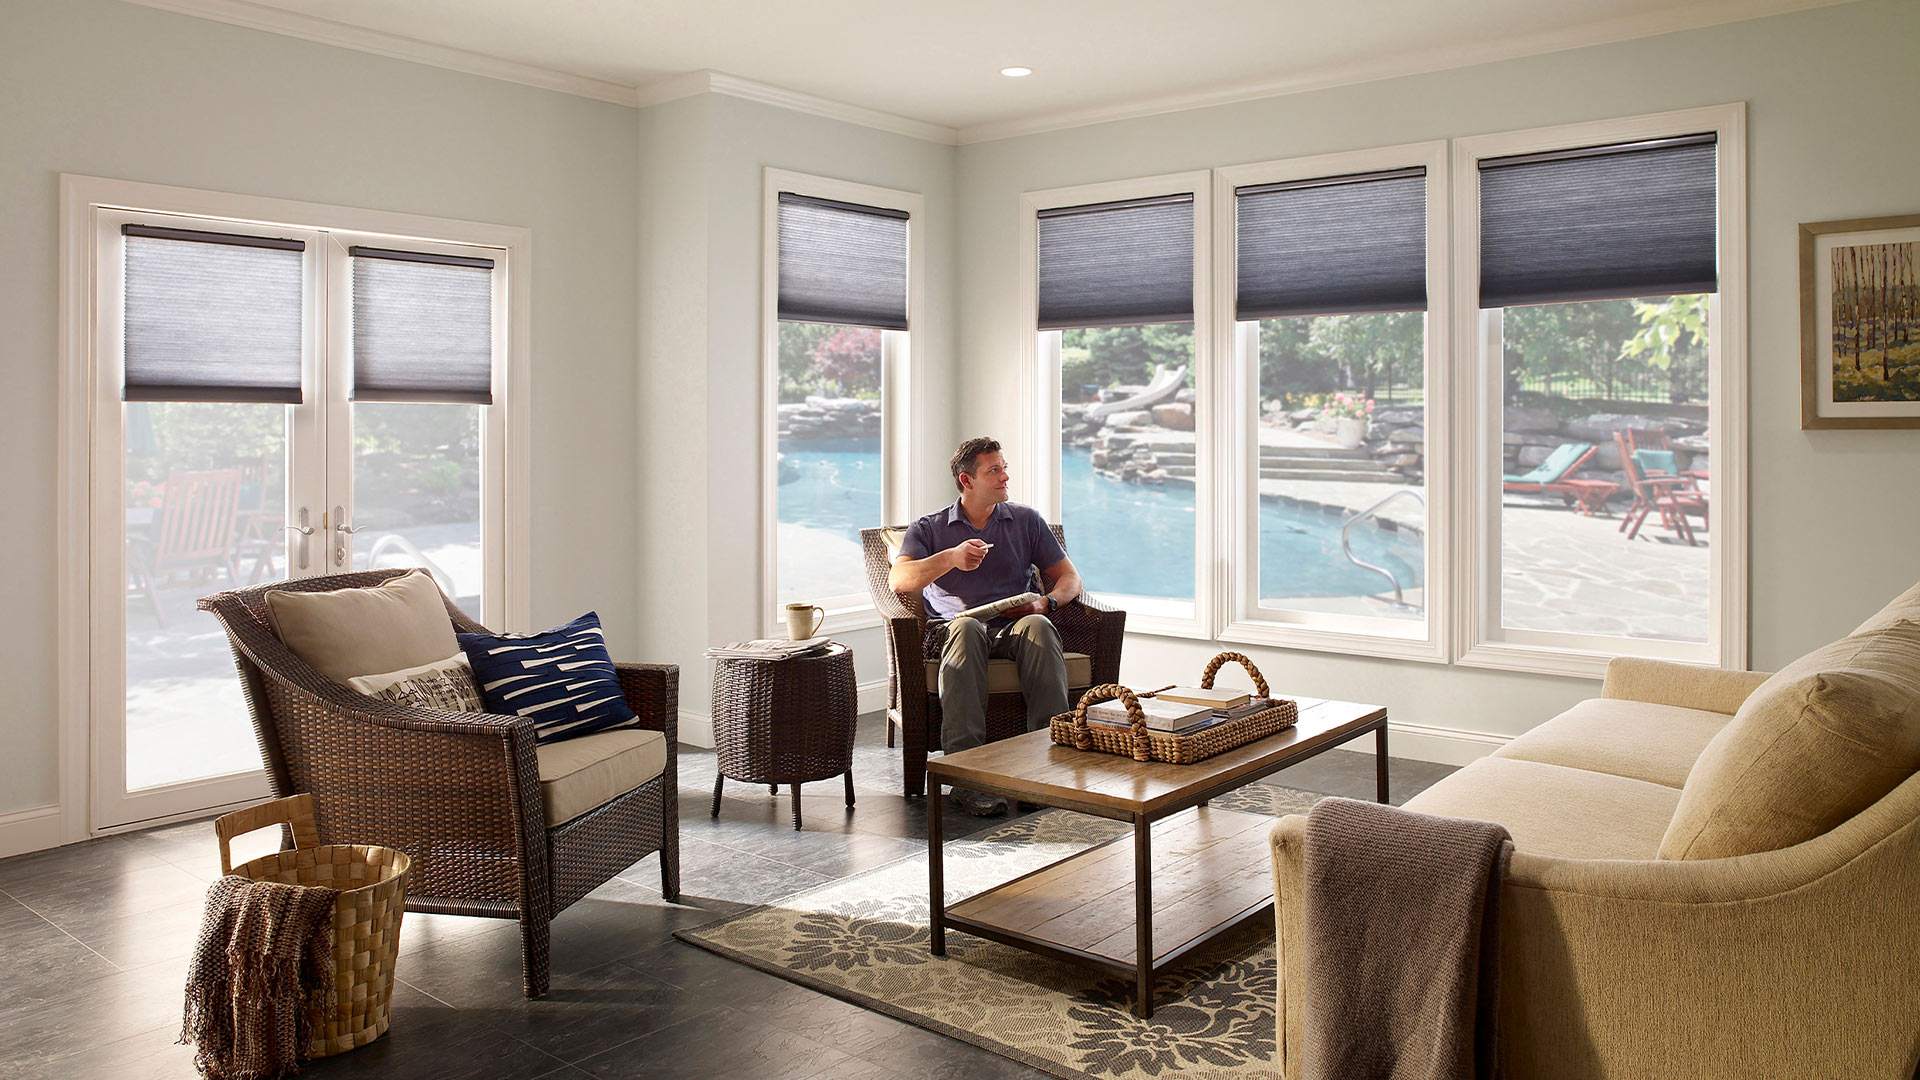 A man relaxes in his custom home thanks to a smart technology integrator